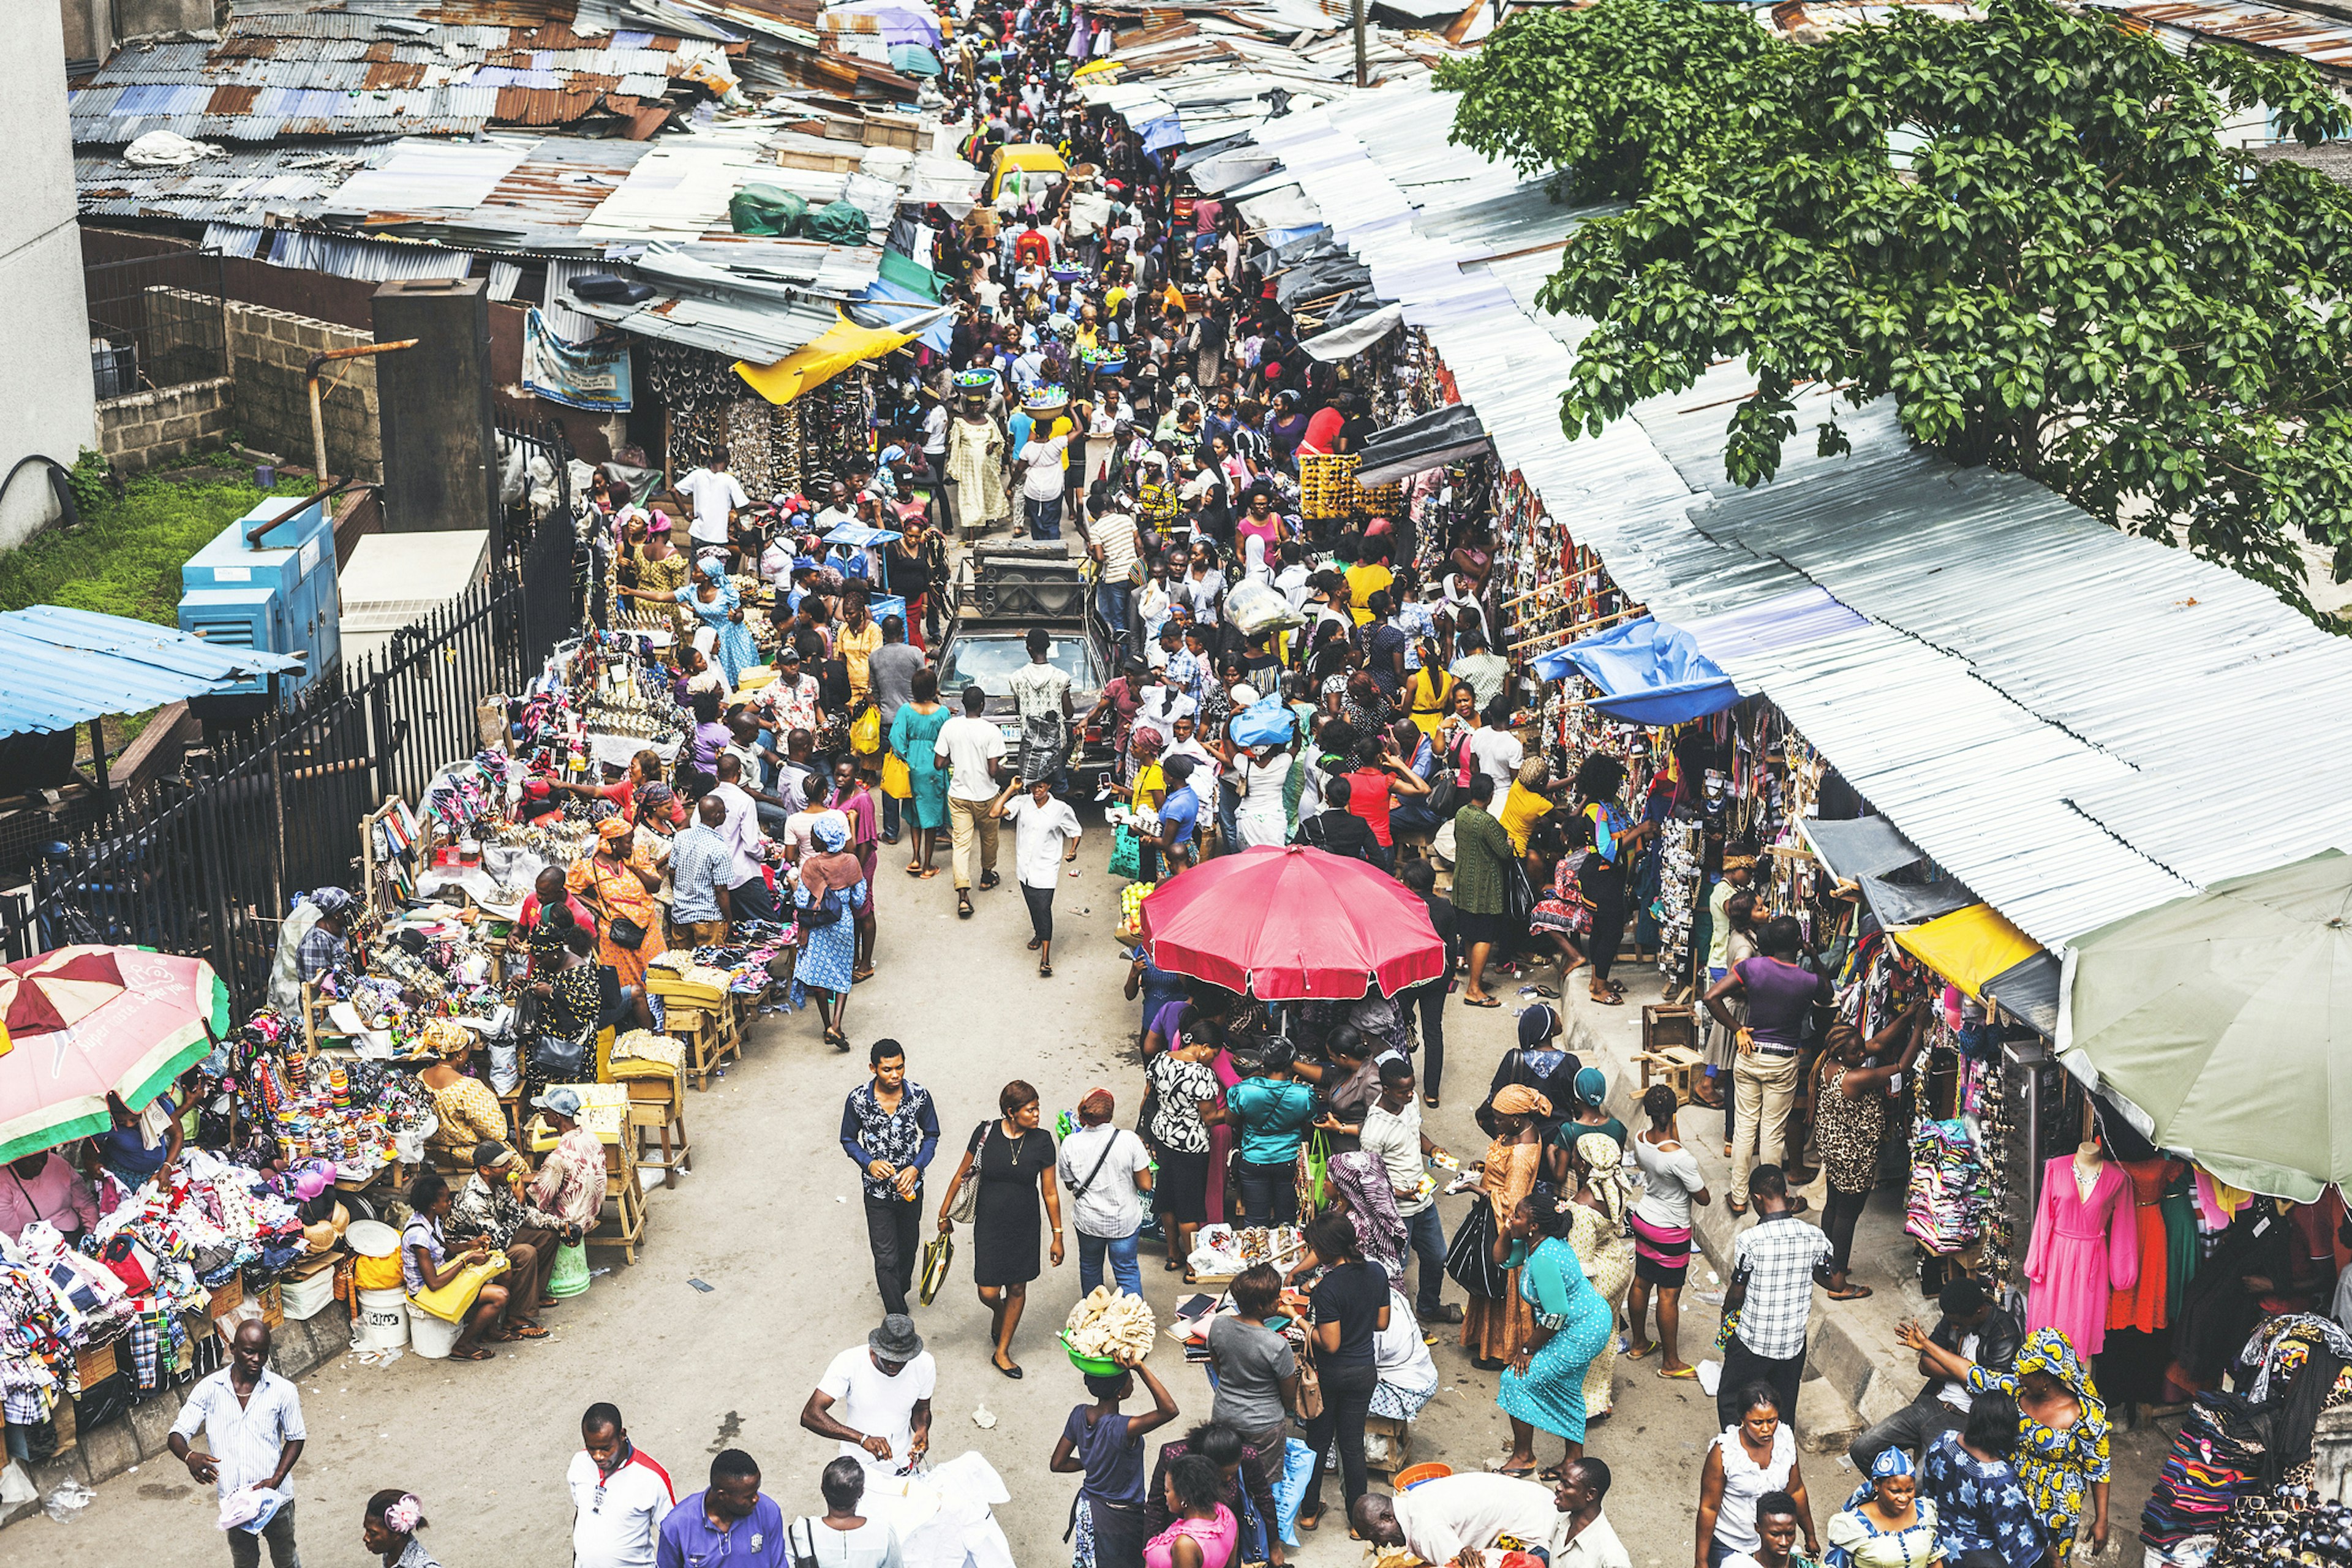 Street market crowd at Lagos Island's commercial district.